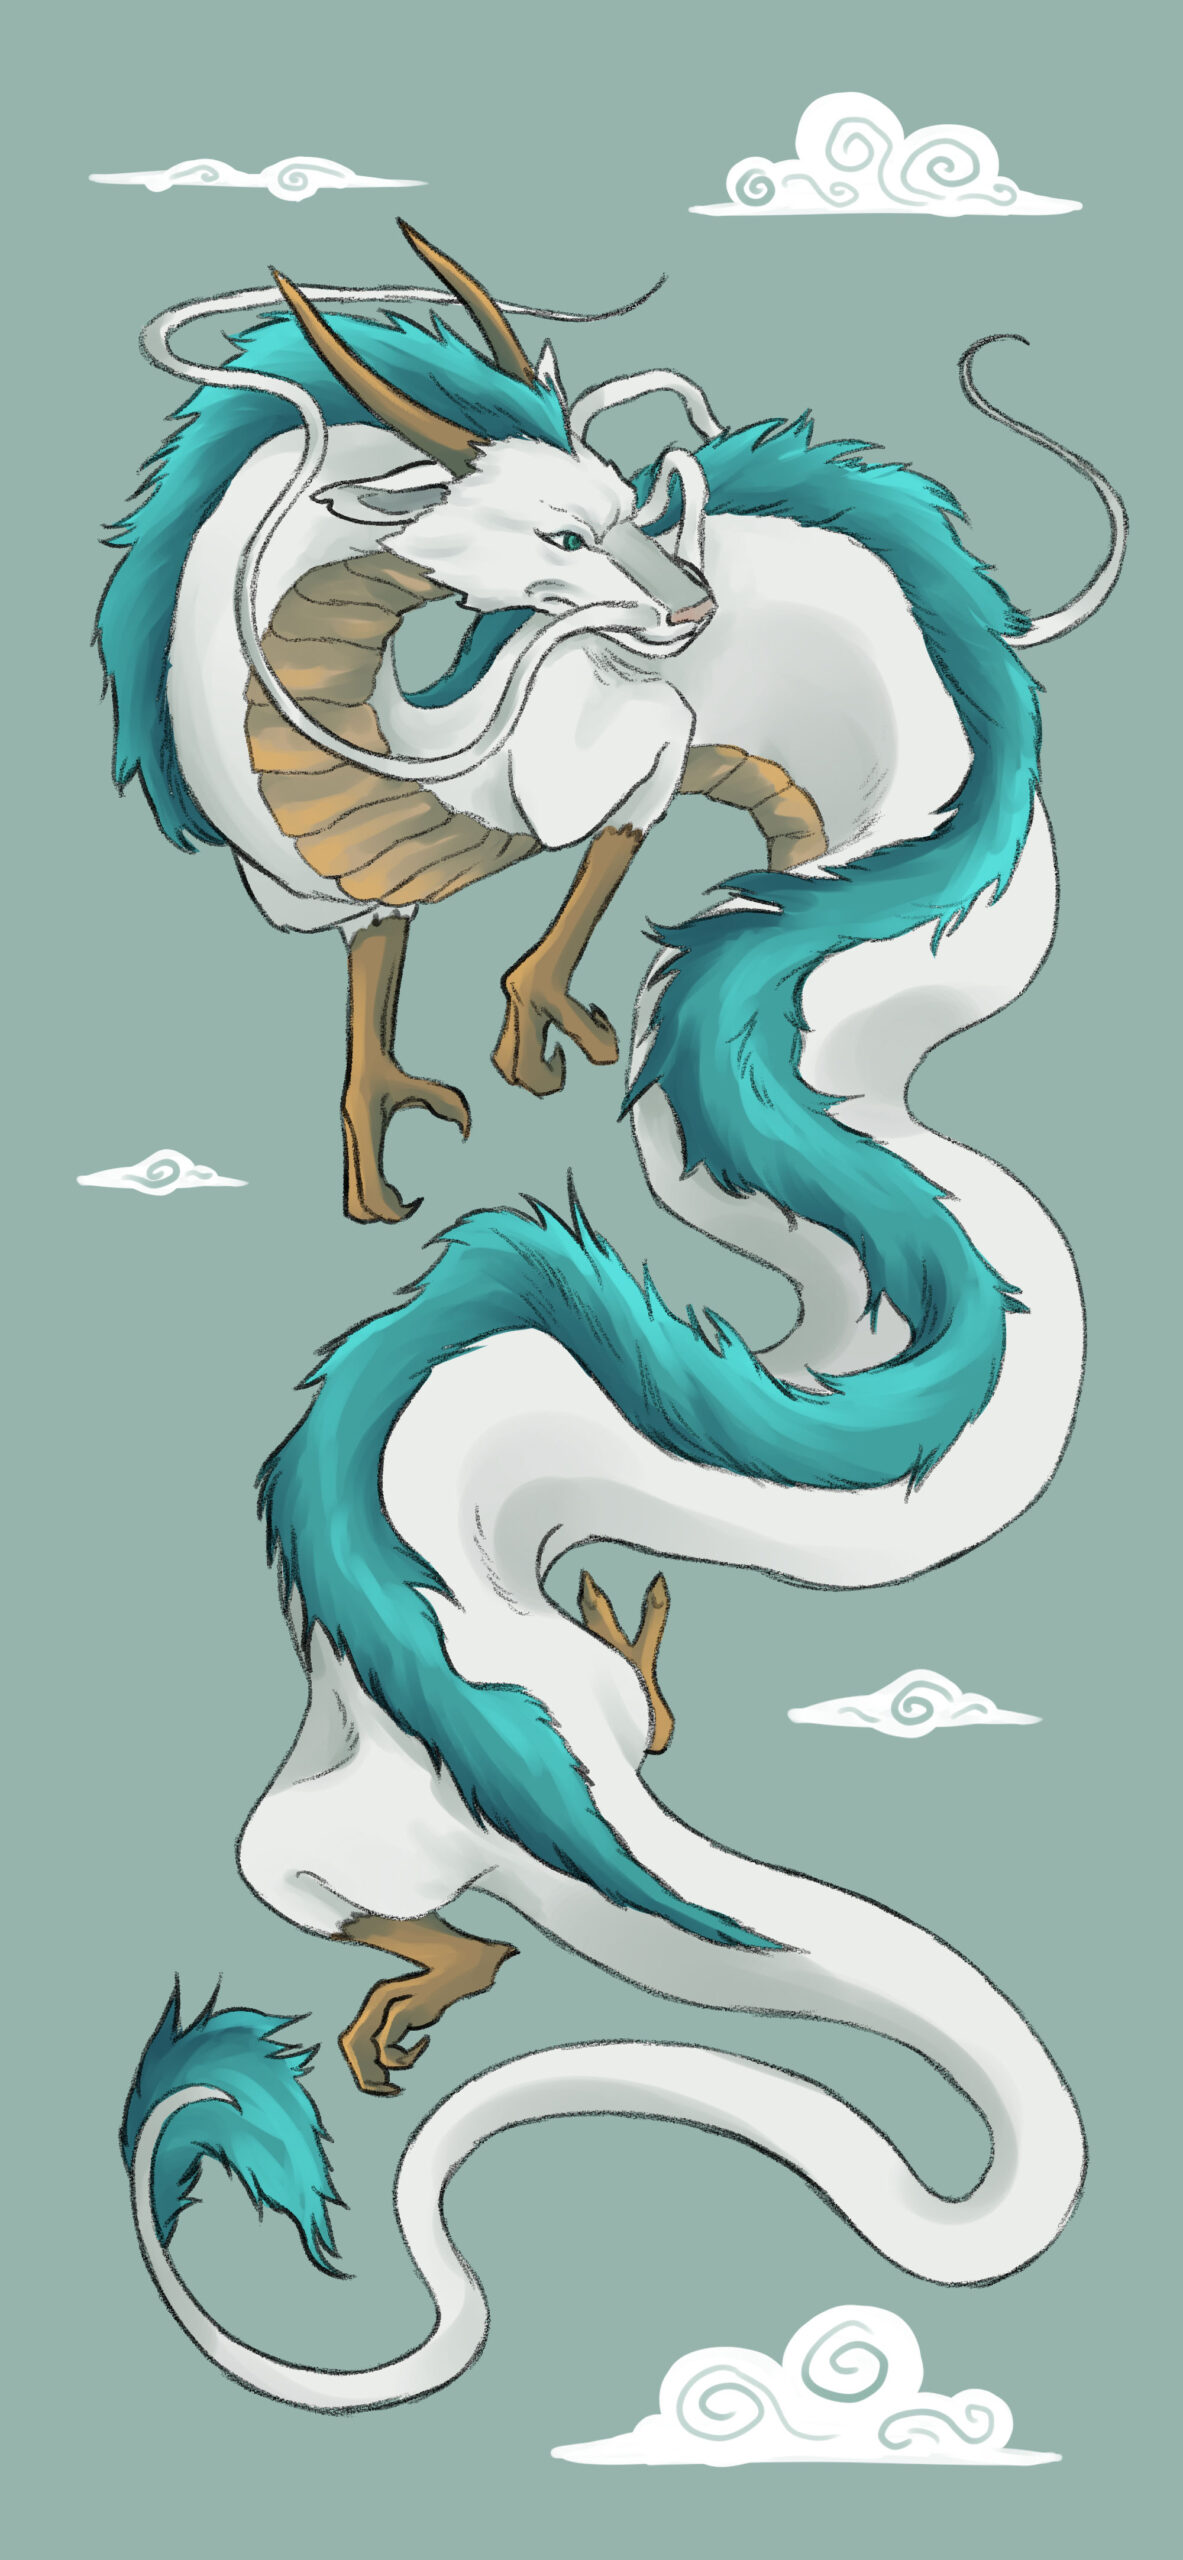 A blue and white dragon with long horns - Dragon